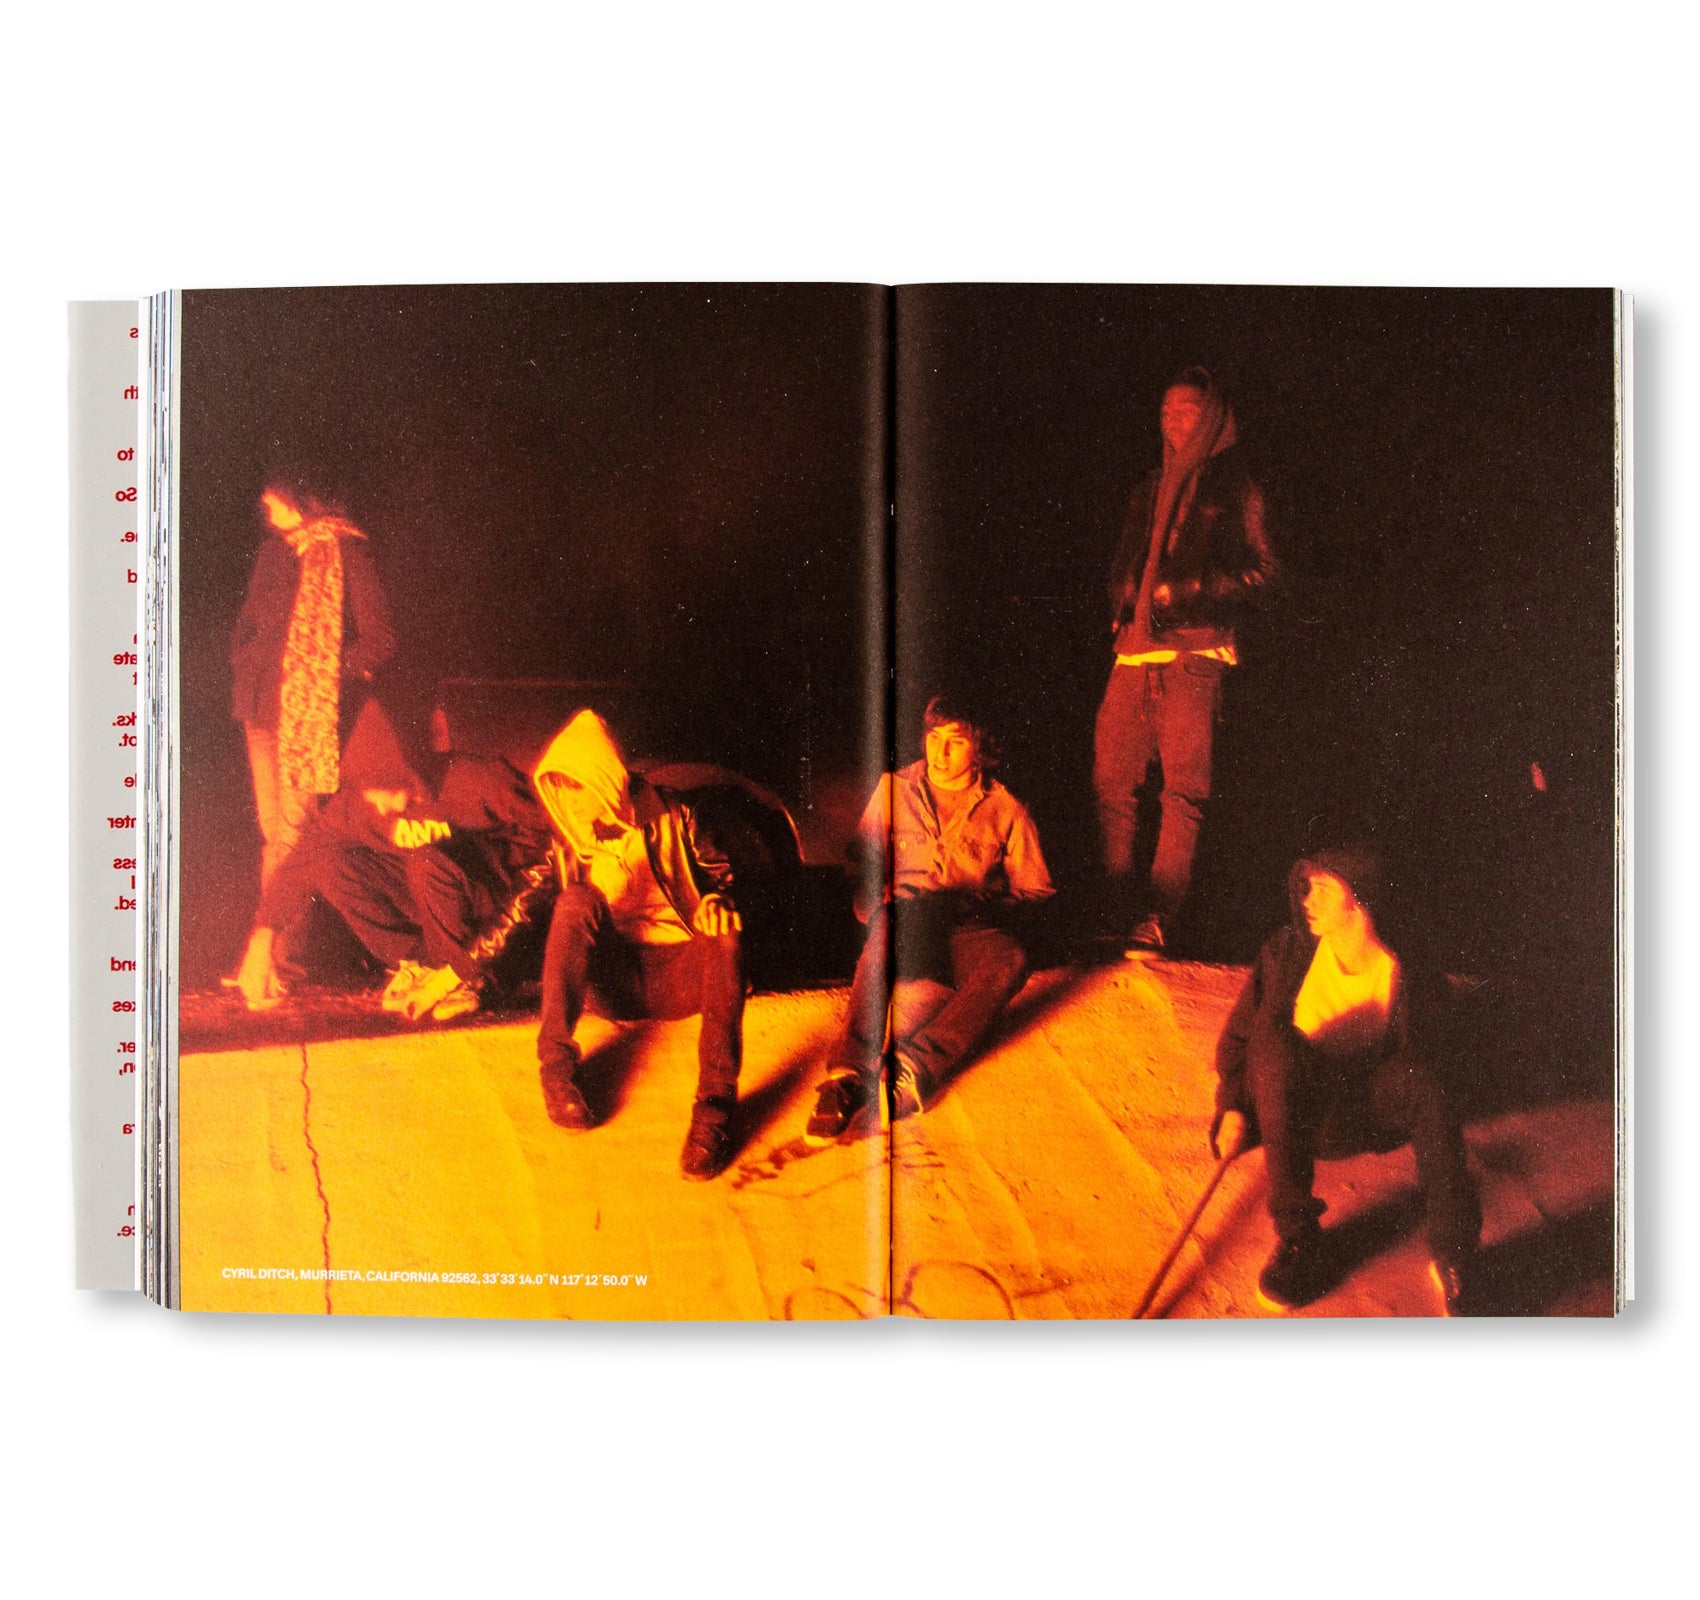 THE LAST SURVIVOR IS THE FIRST SUSPECT by Nick Haymes [SPECIAL EDITION]